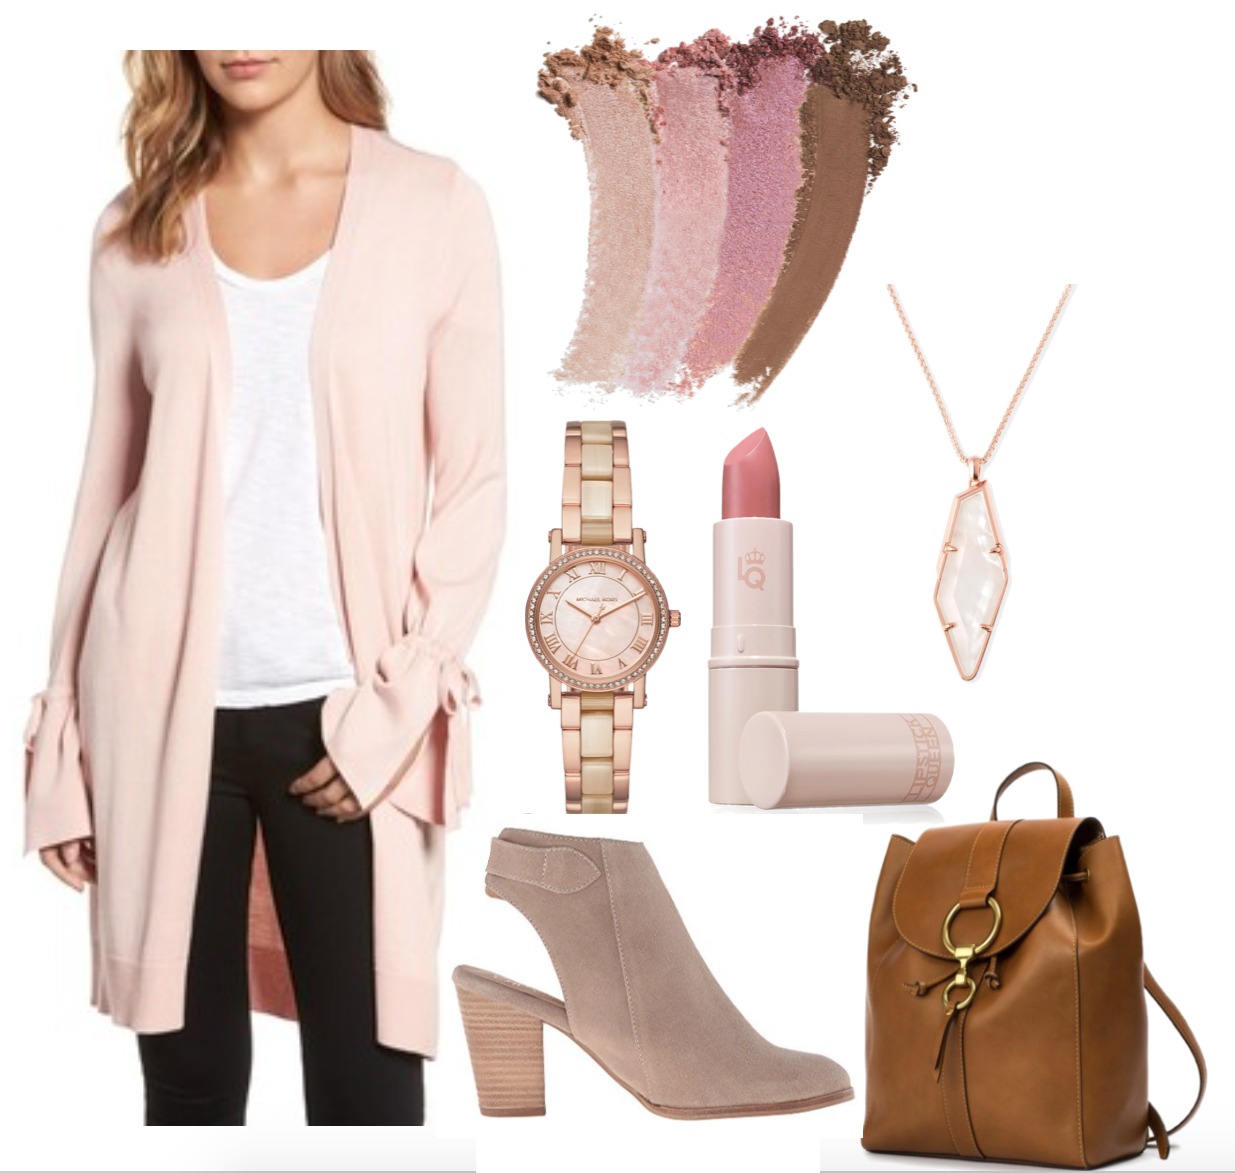 fall outfits over 40